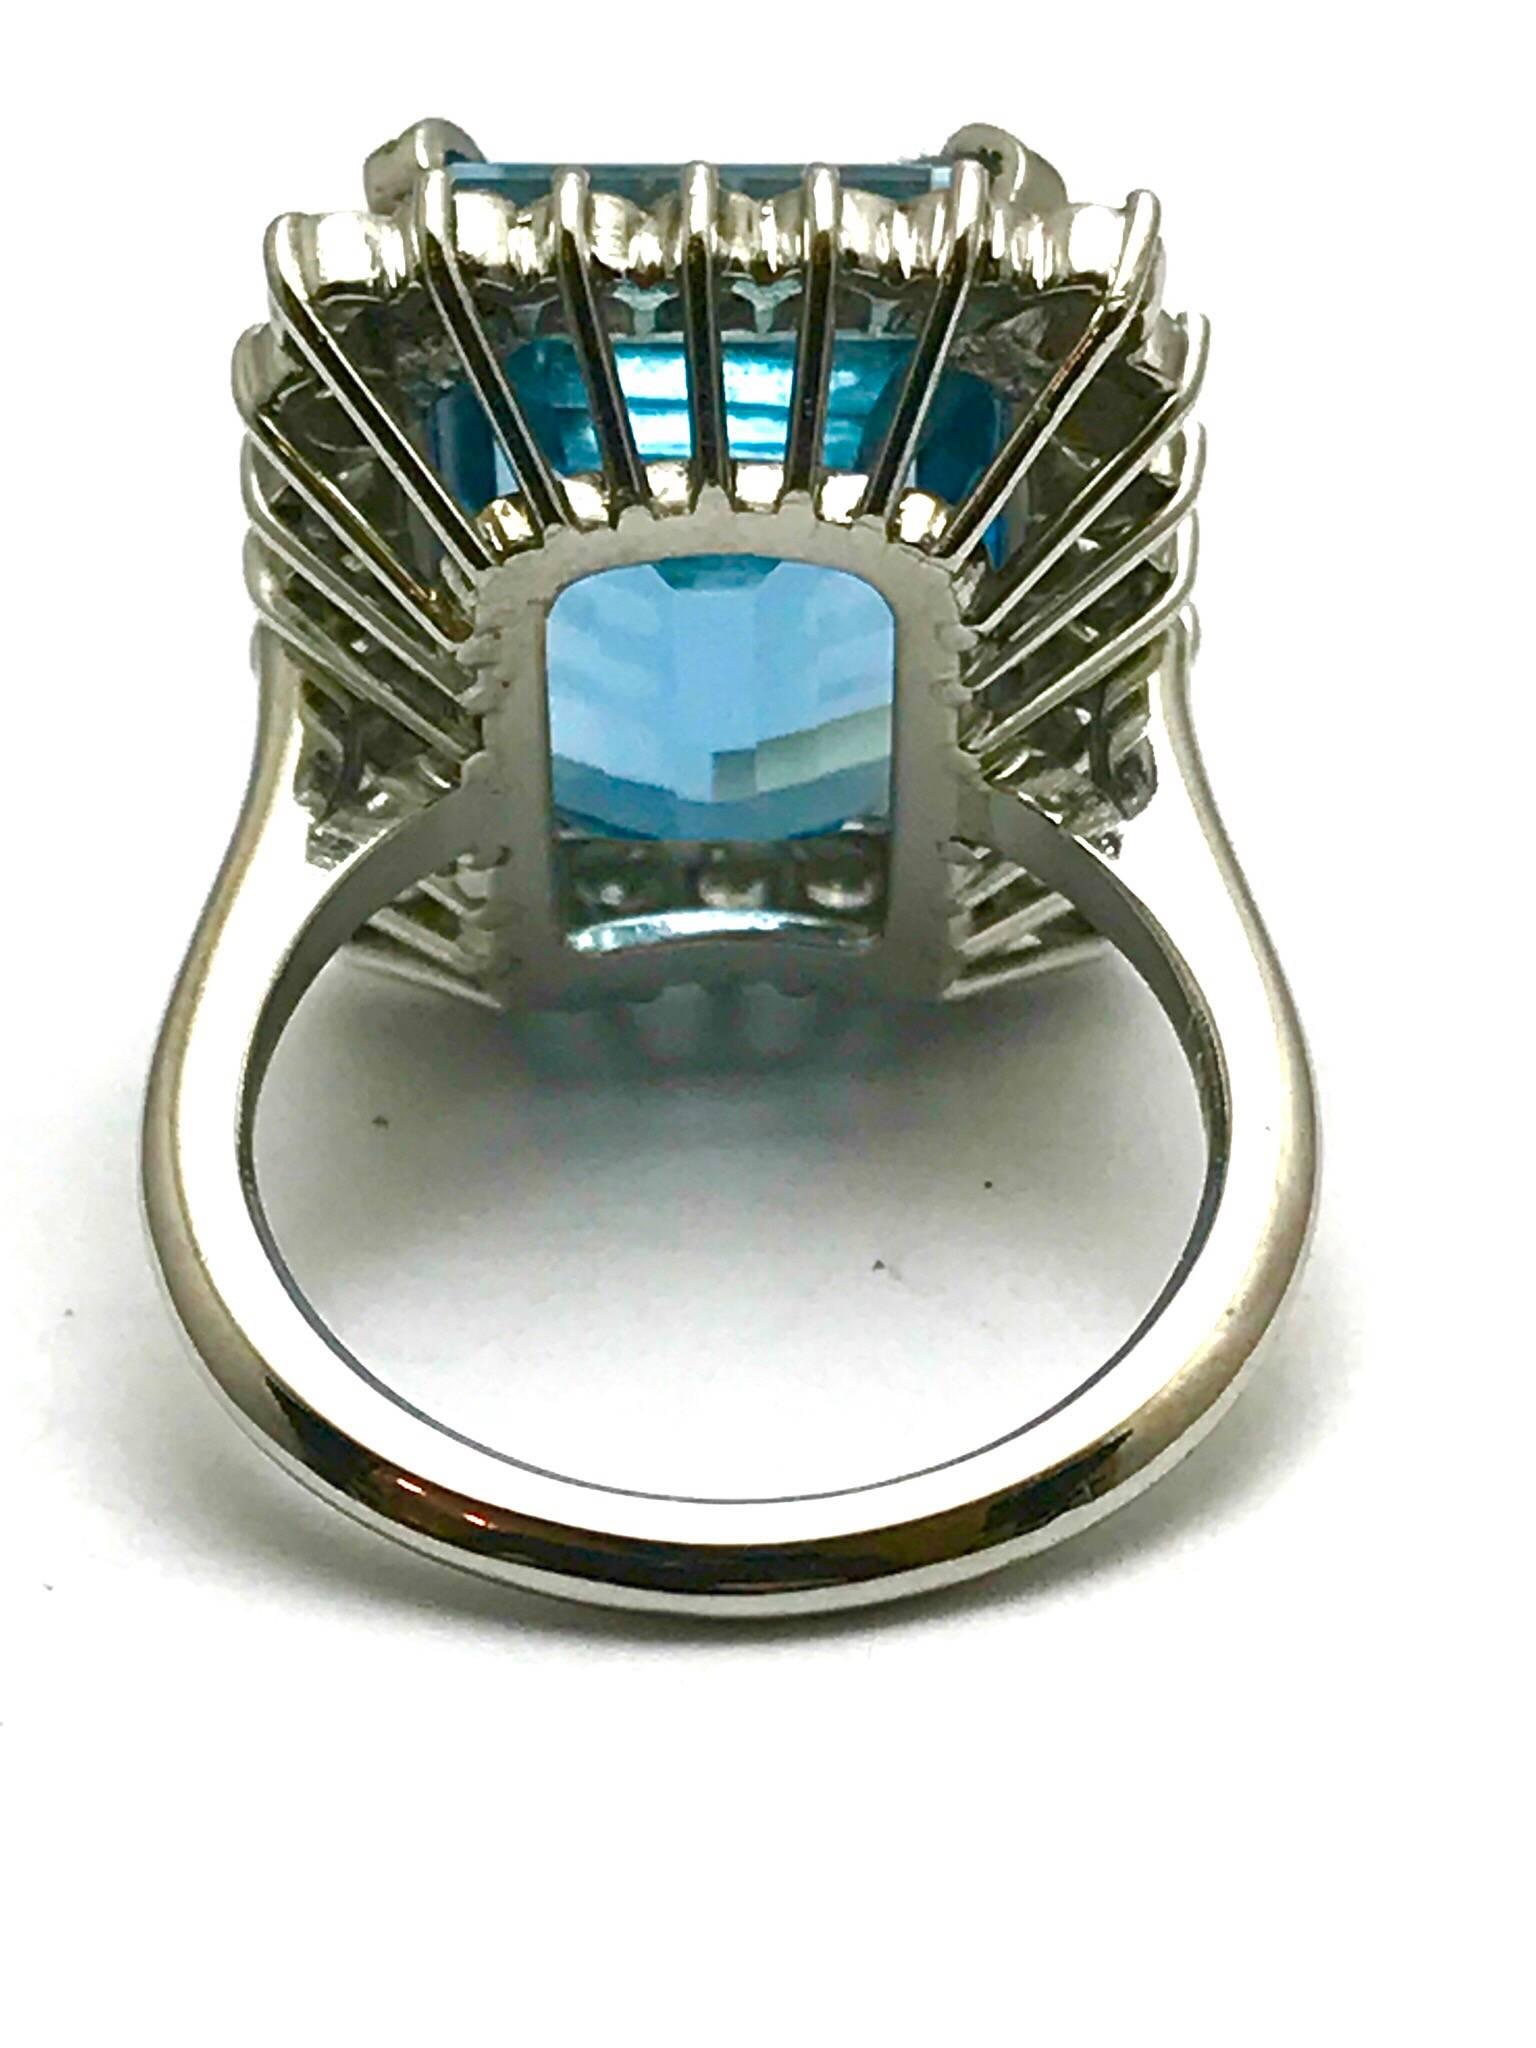 12.16 Carat Emerald Cut Aquamarine and Diamond Platinum Ring In Excellent Condition For Sale In Chevy Chase, MD